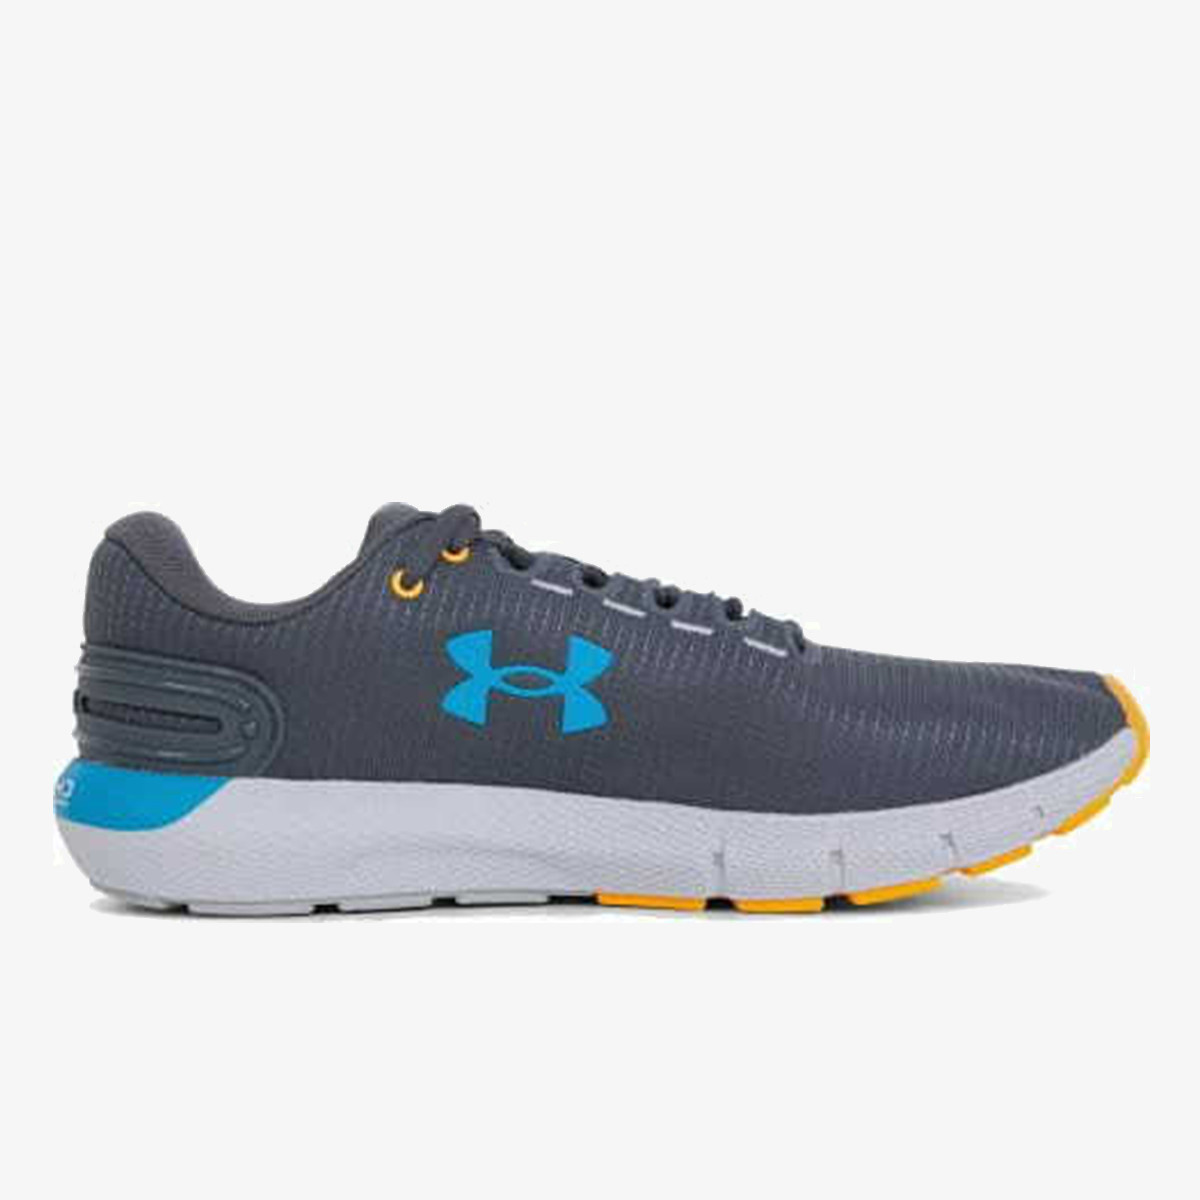 Under Armour Charged Rogue 2.5 Storm 